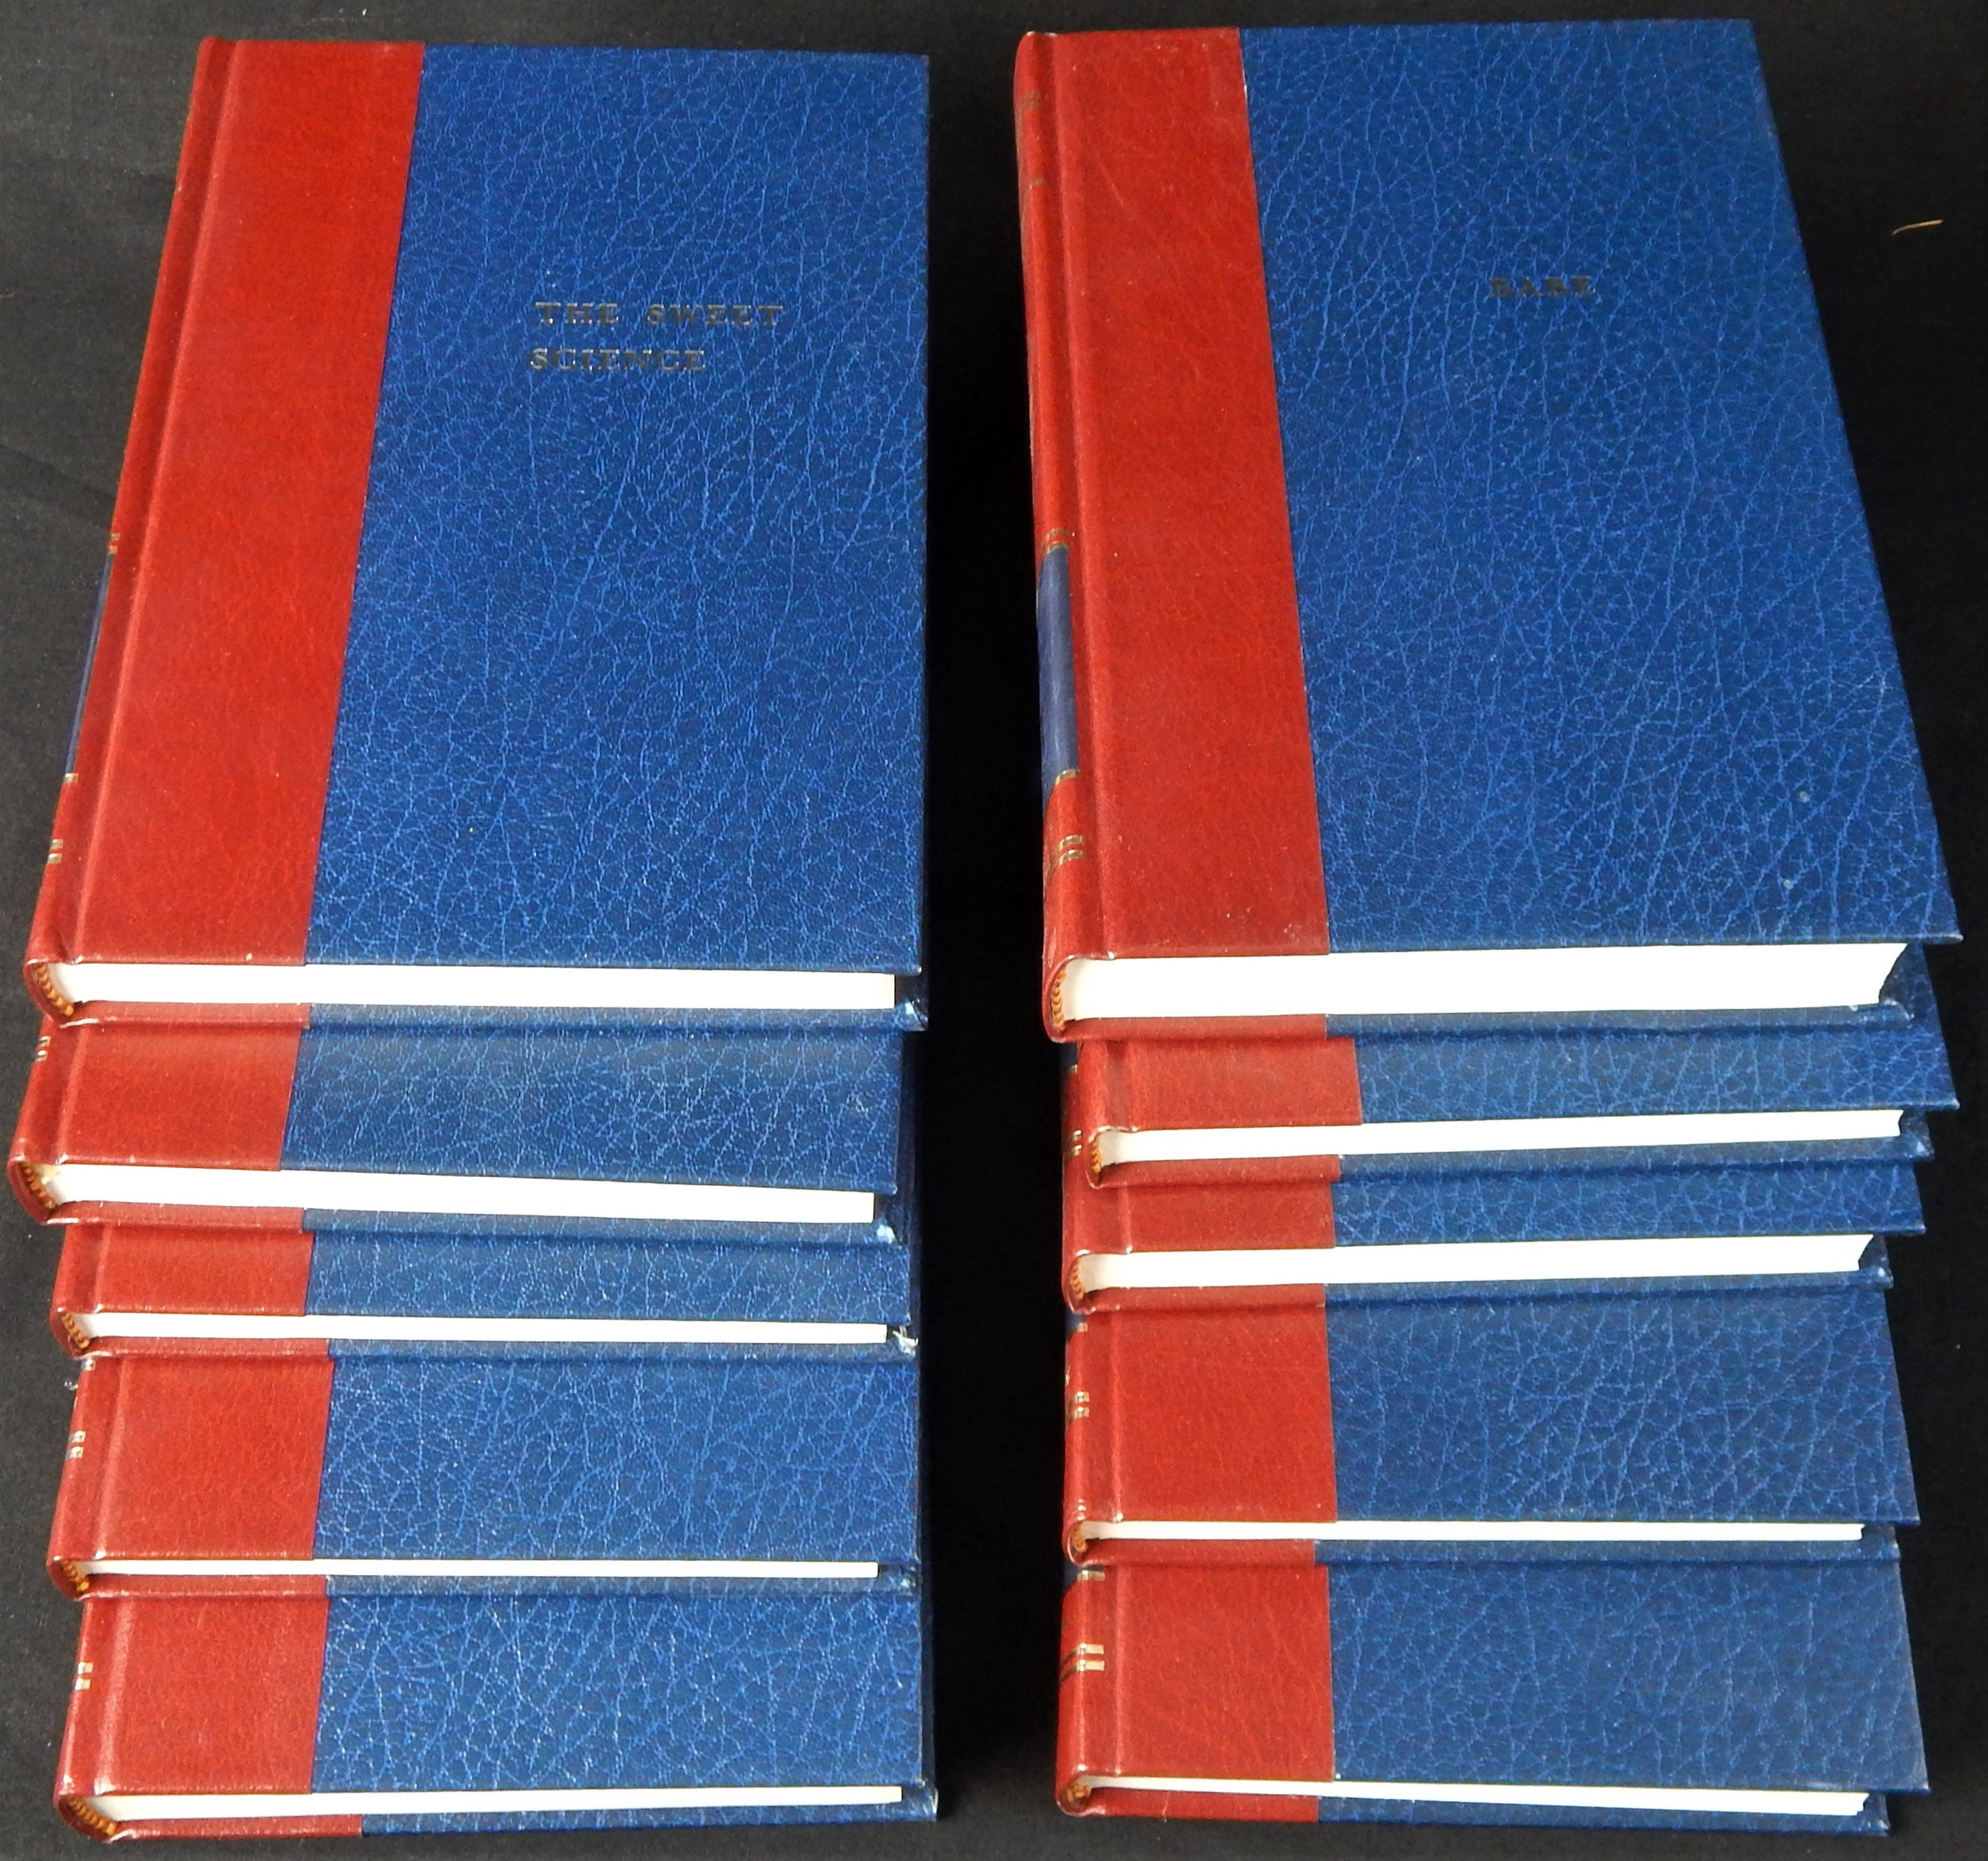 1980 "Sport Classics" Signed 10 Volume Book Set with BILL VEECK